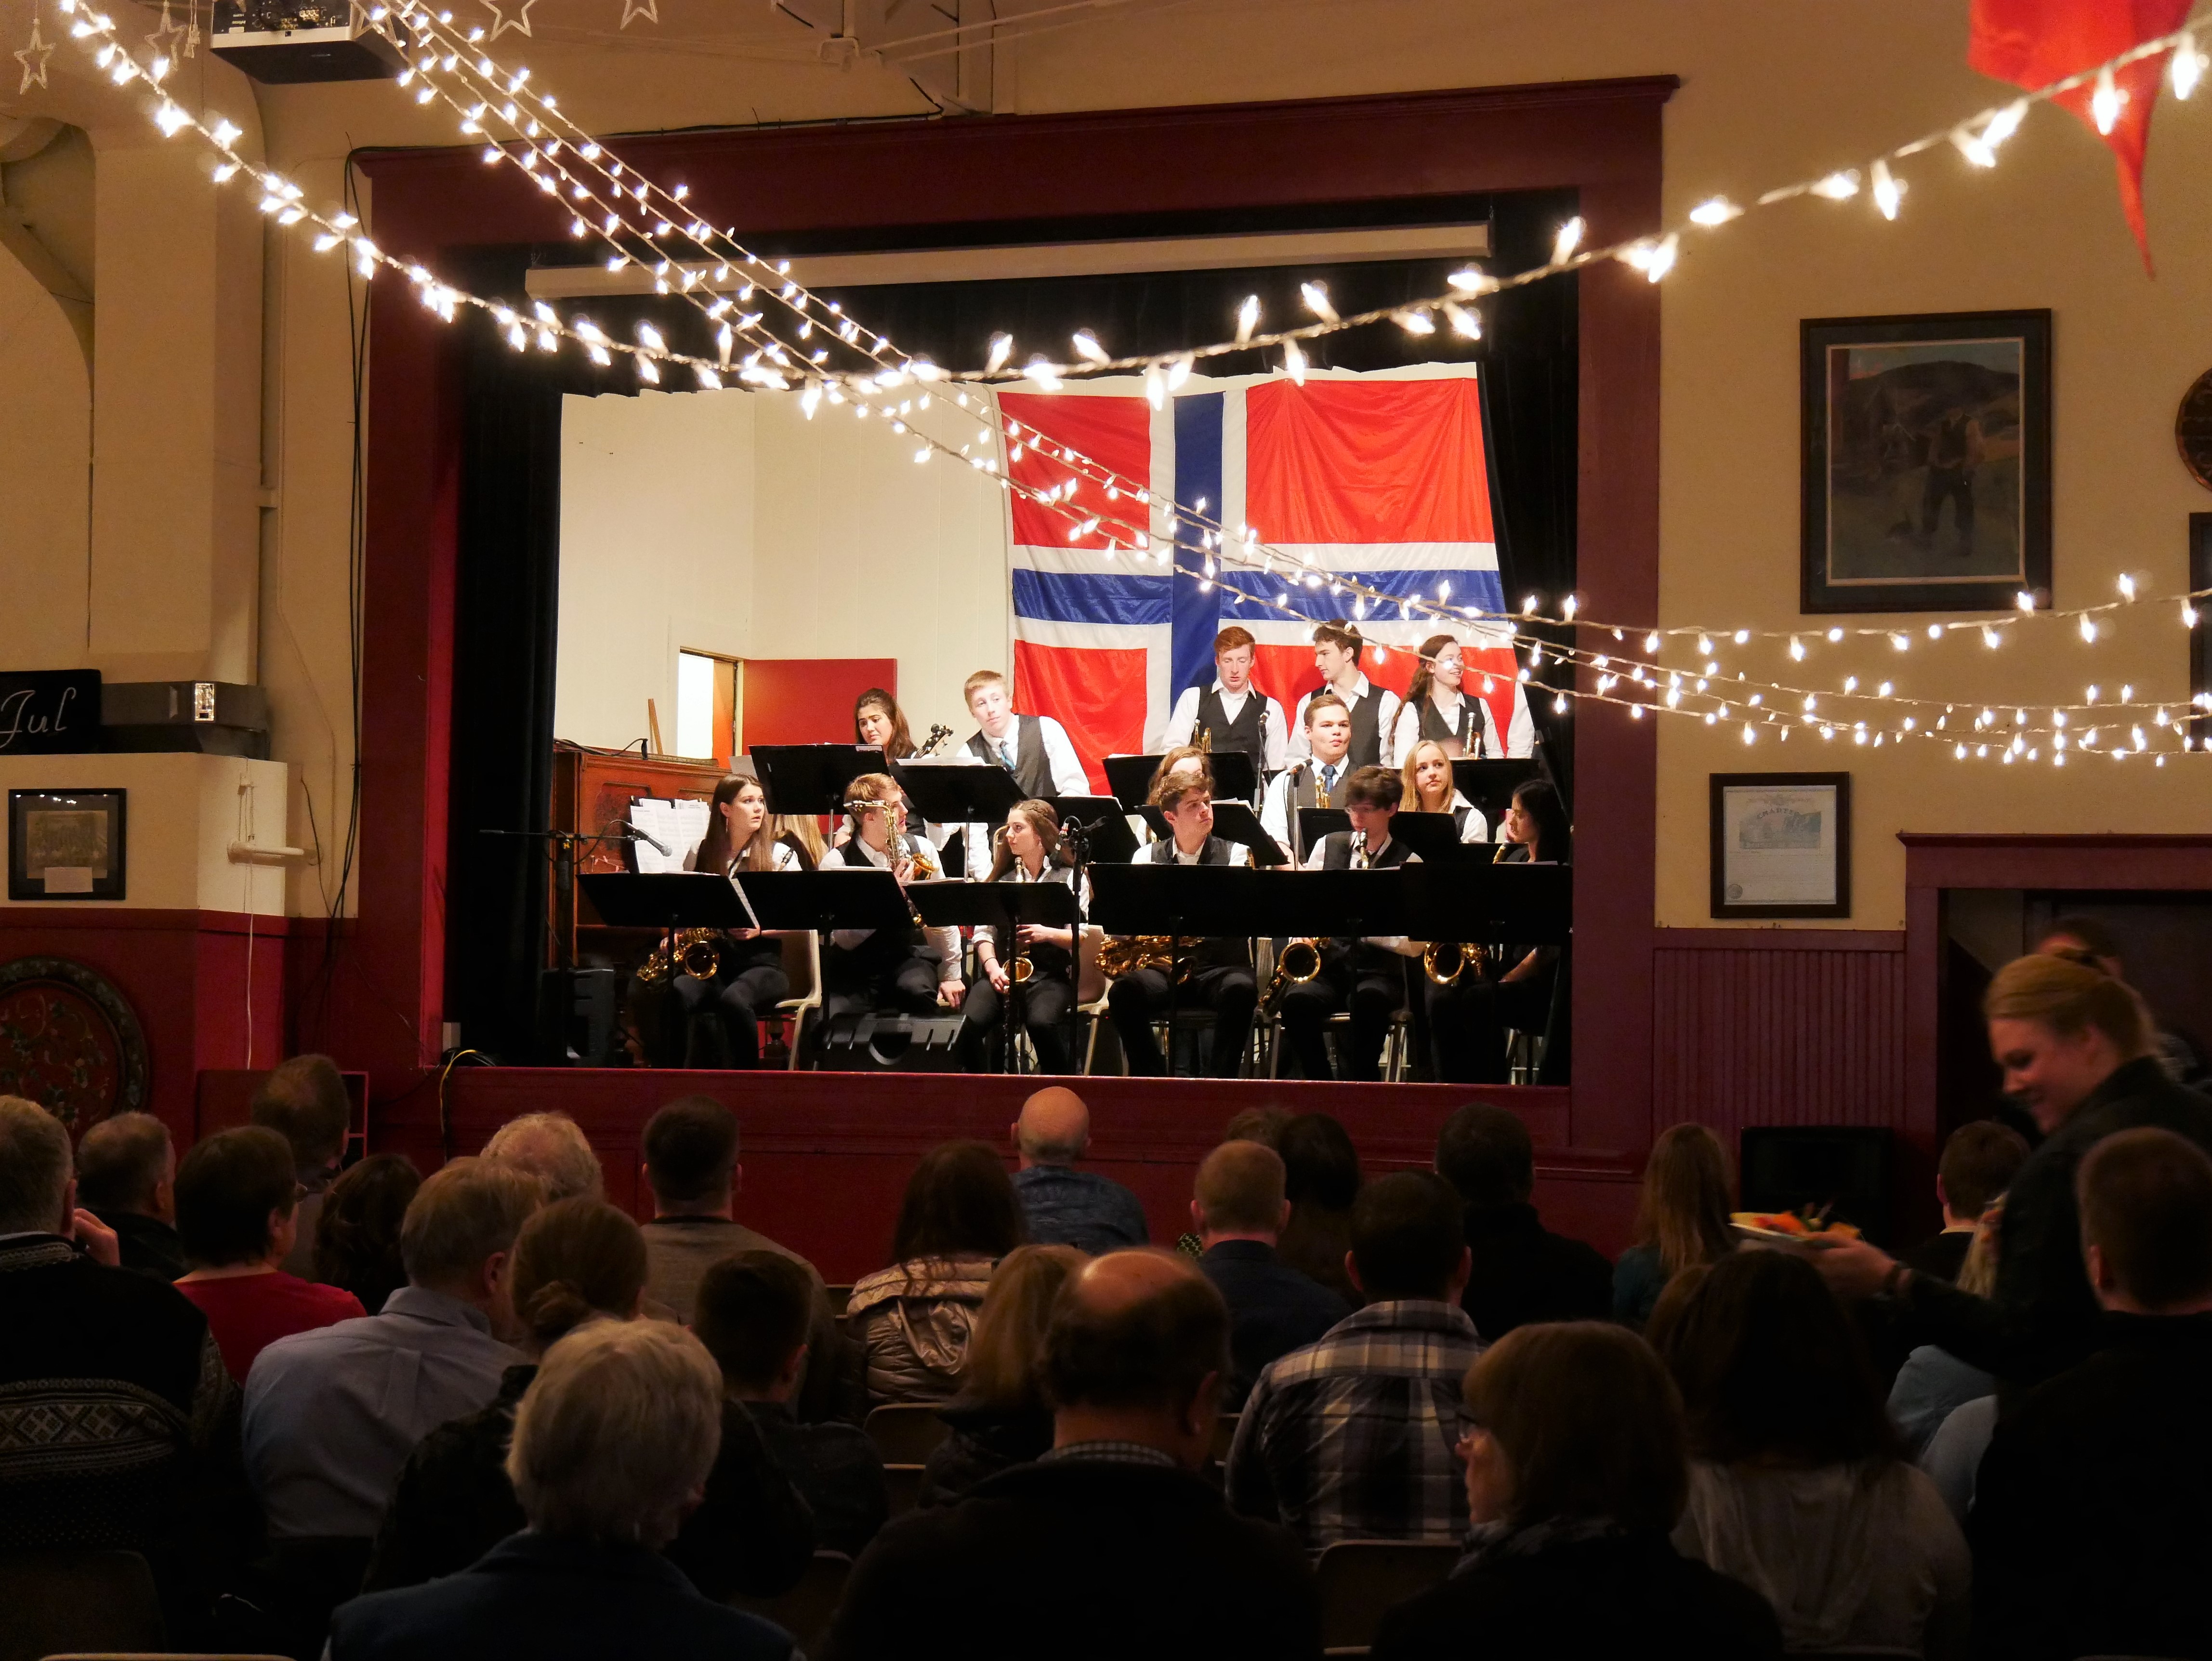 Petersburg High School’s jazz band performs a two-hour concert at the Sons of Norway Hall, March 24, 2018. It was a fundraiser to buy plane tickets for 60 music students to attend Music Fest in Juneau, April 12-14. (Photo by Angela Denning/KFSK)